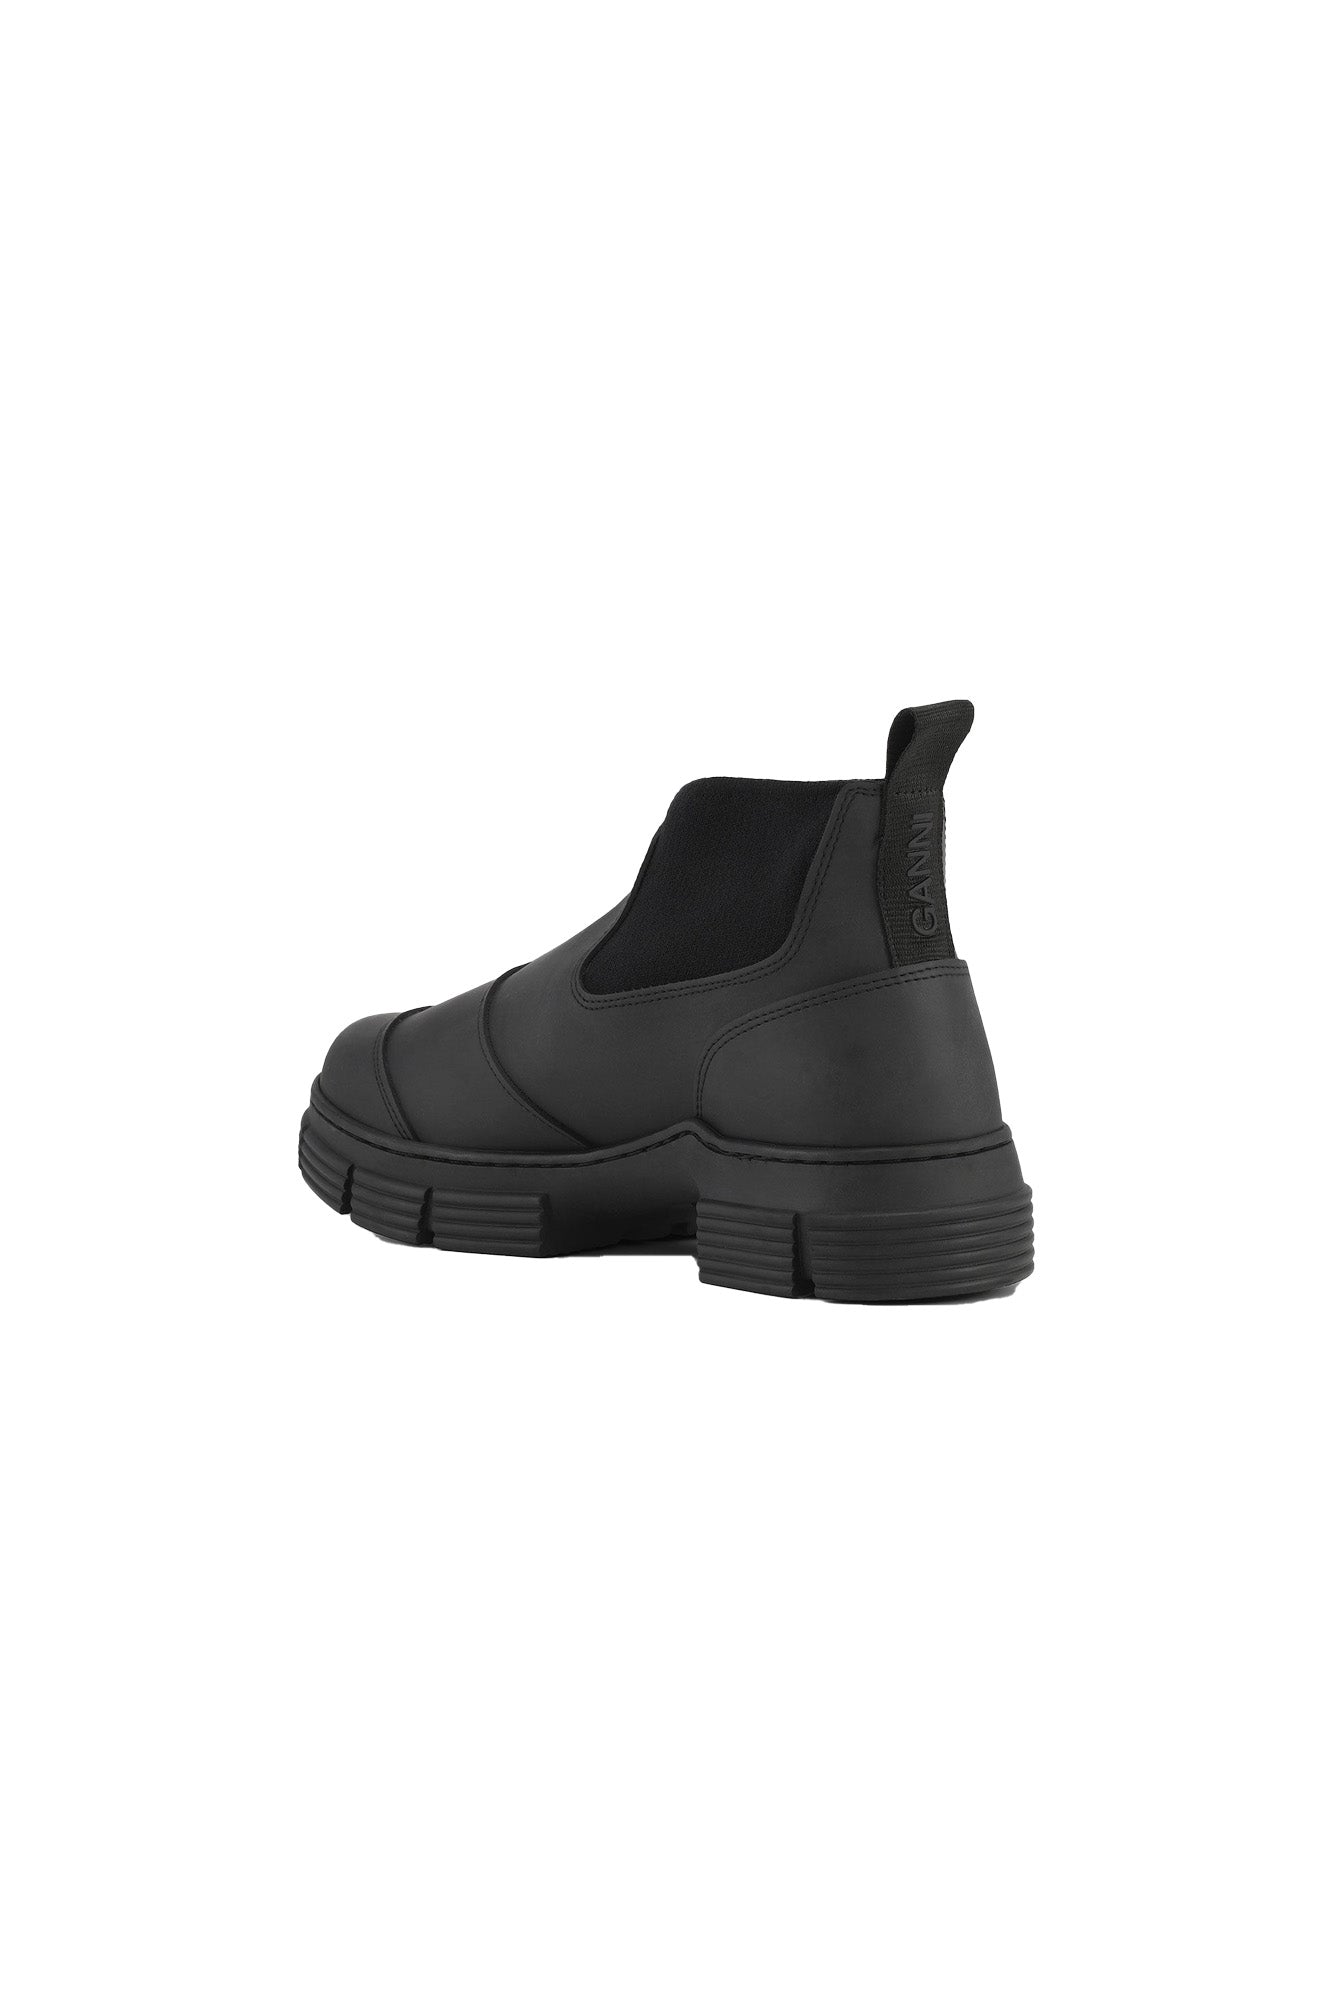 RECYCLED RUBBER CROP CITY BOOT